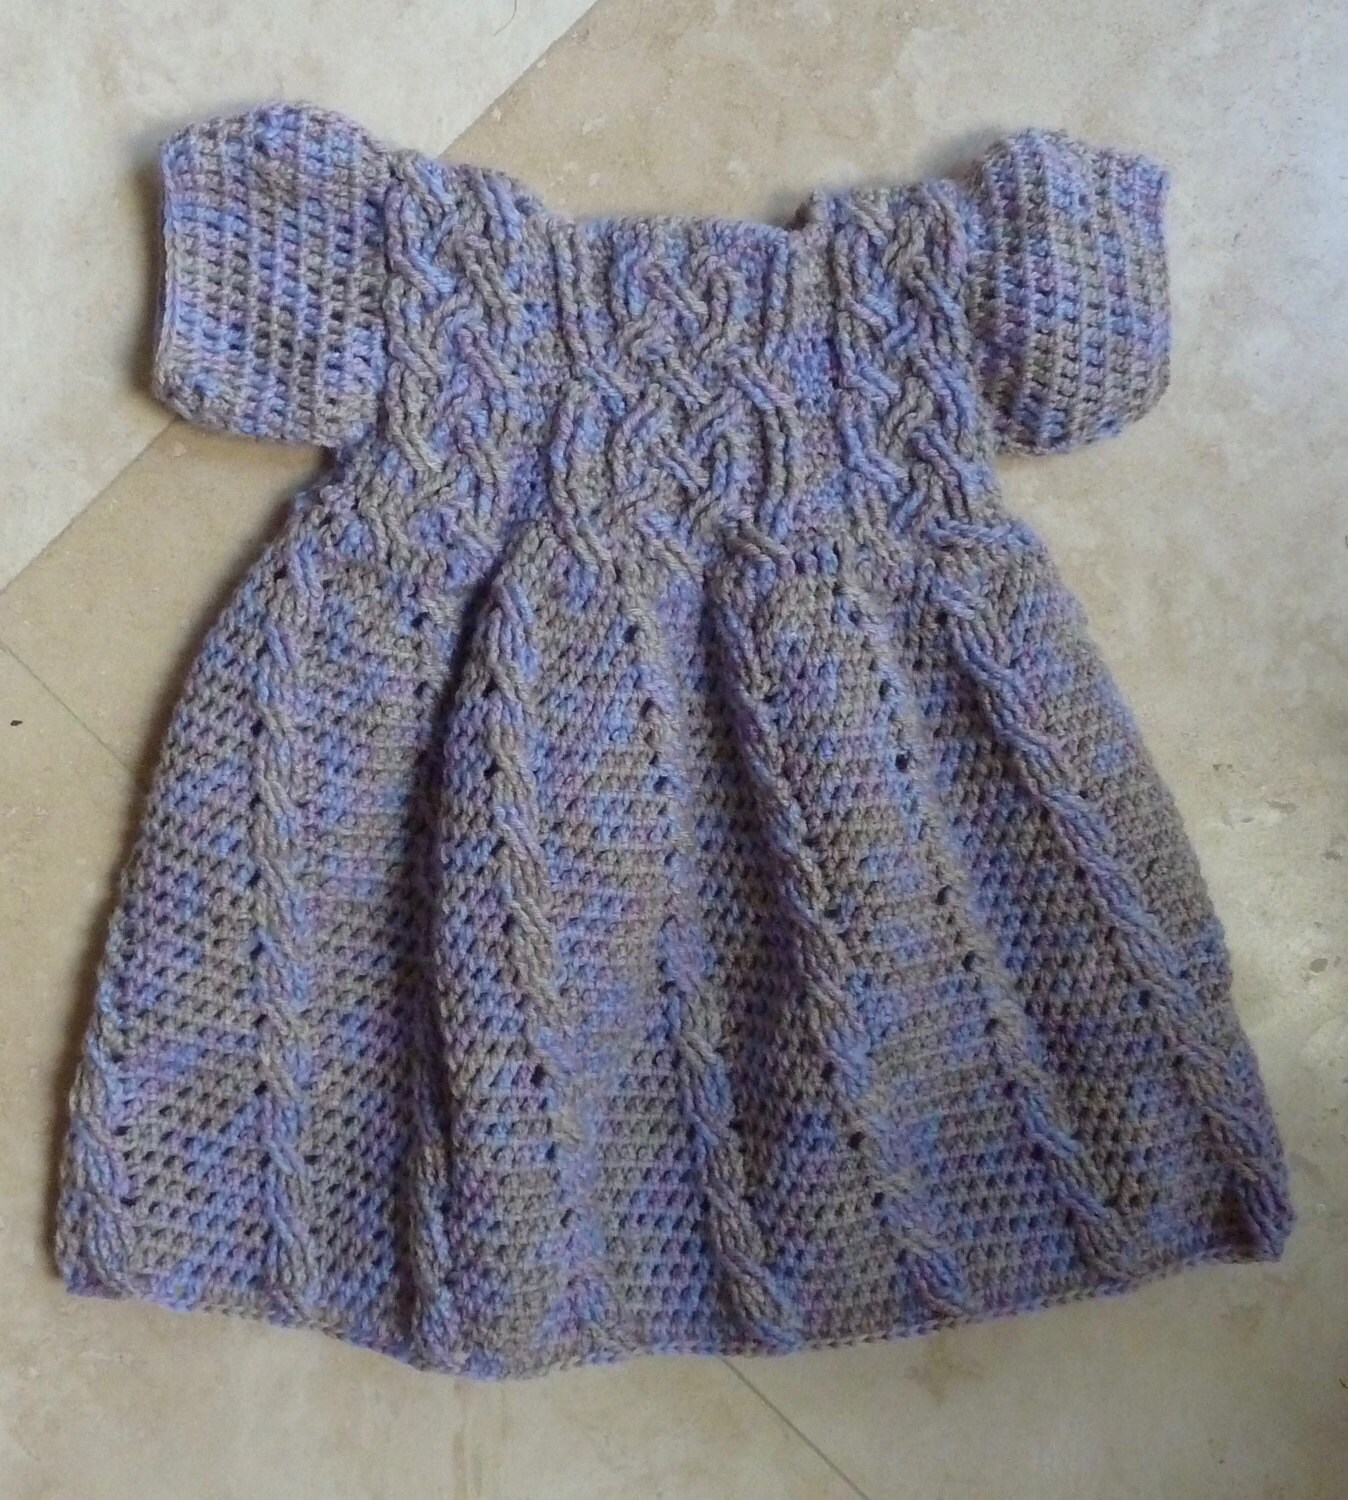 Rapunzel Braided Cable Baby Dress Crochet Pattern for Girls | Etsy